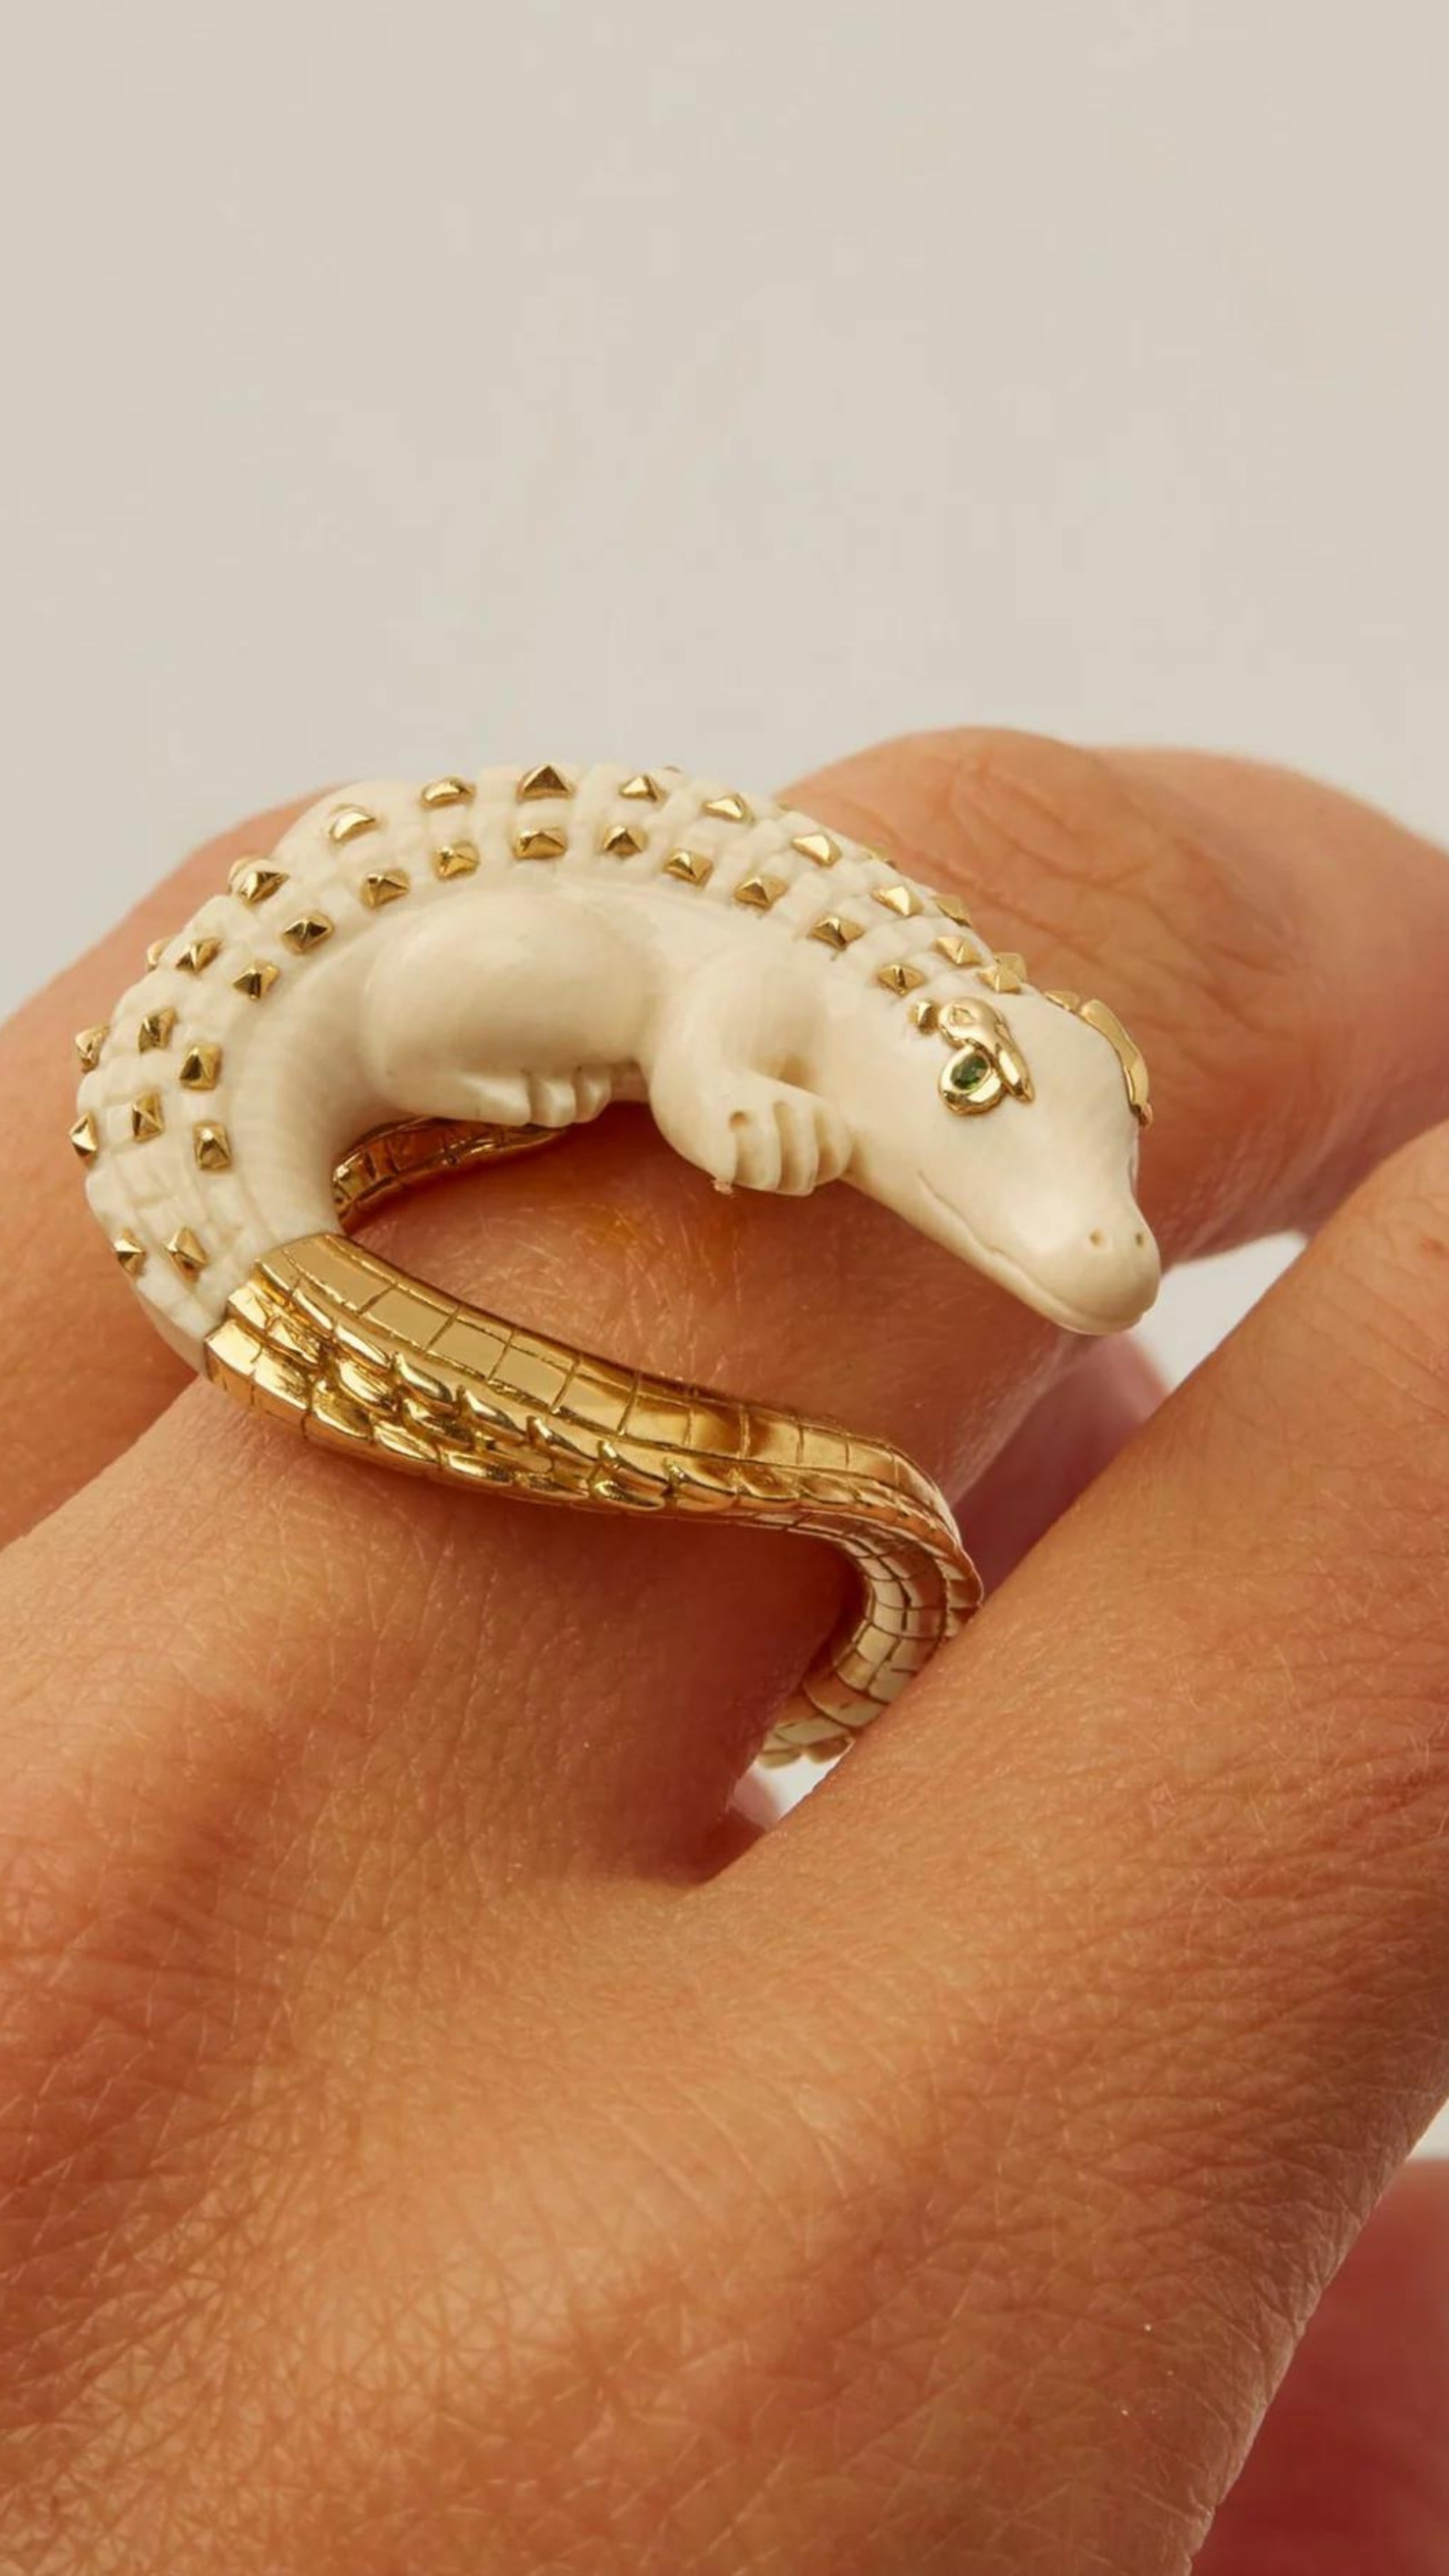 Bibi van der Velden Mammoth Alligator Twist Ring. Crafted in mamoth tusk in the shape of an alligator that curves around the finger. The tail is made from 18K gold and the ivory body has 18K gold studs. The ring is shown on a model.